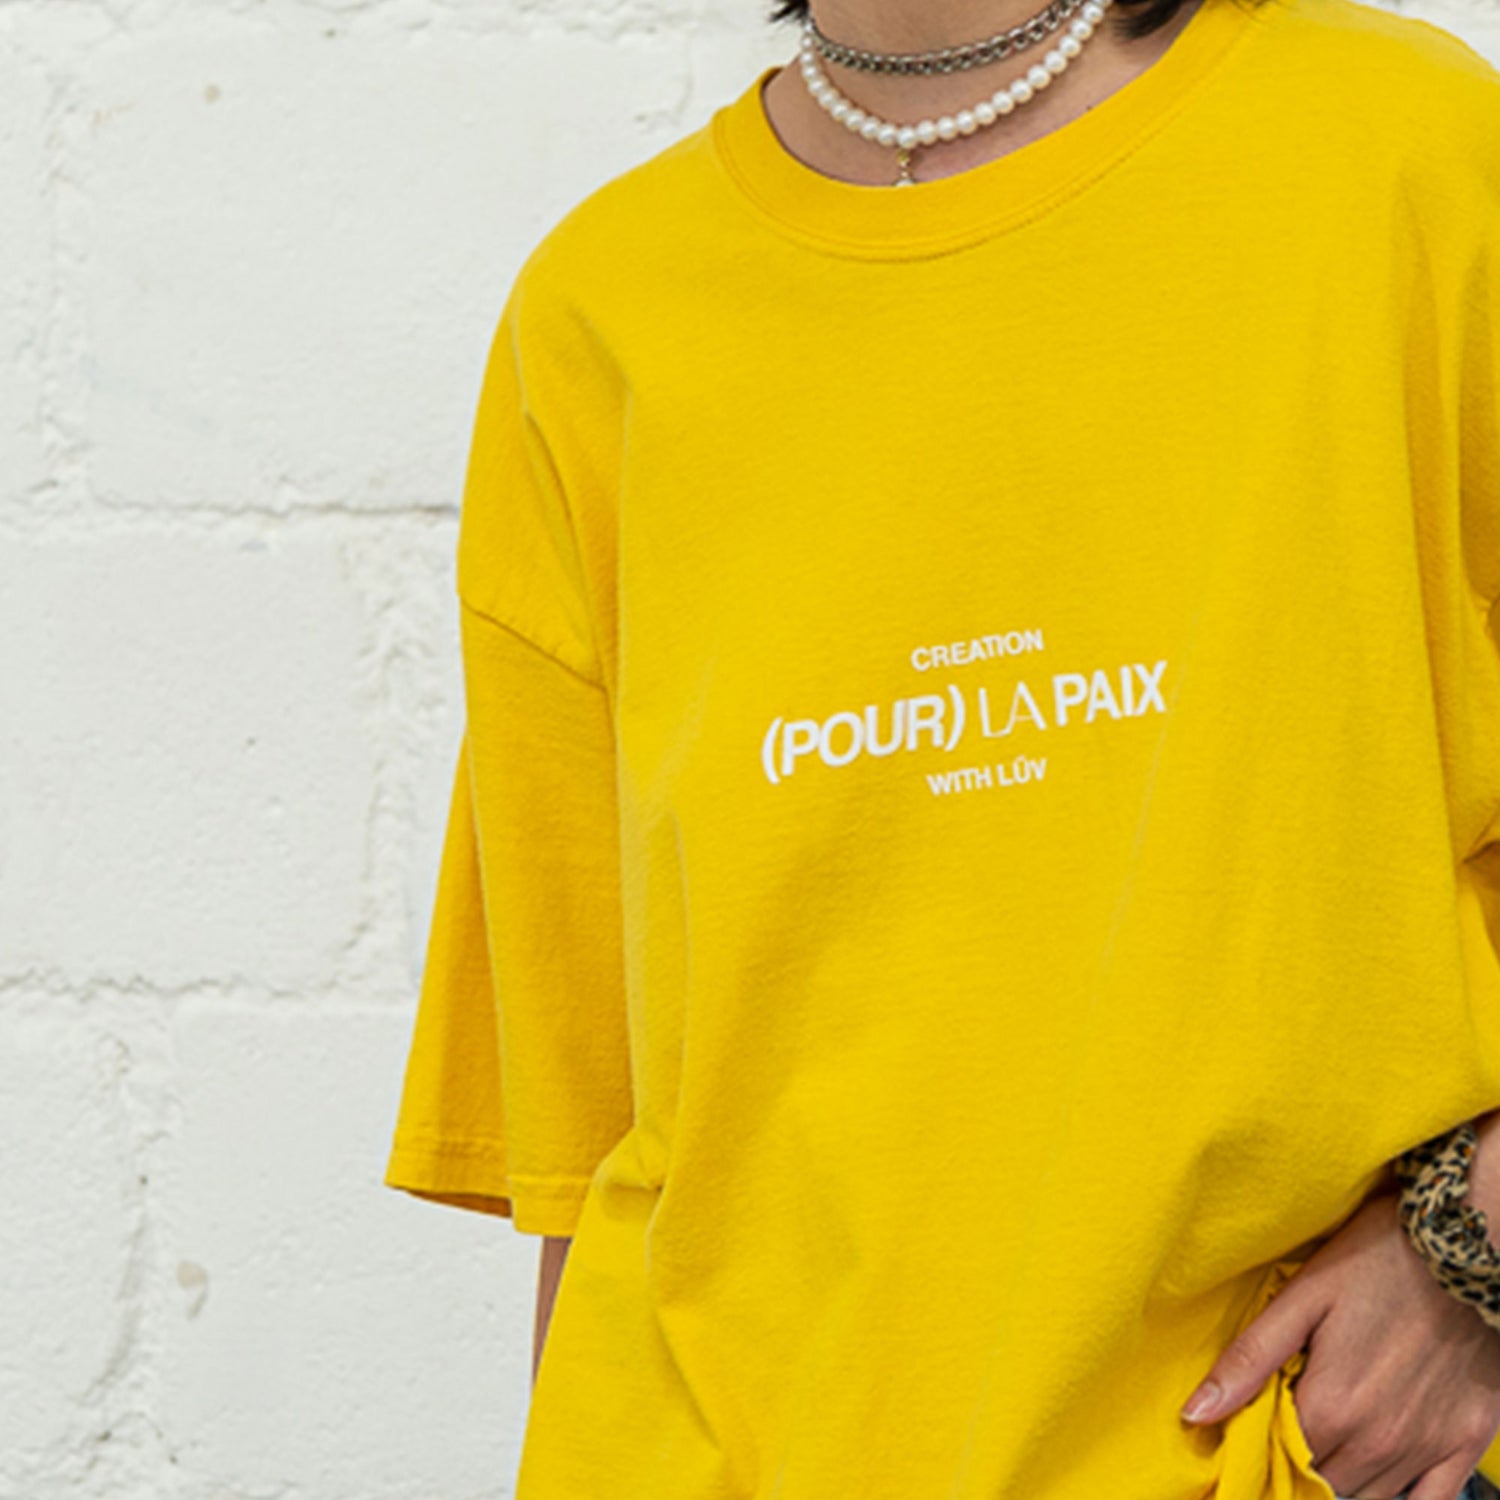 pour-la-paix-t-shirt-upcycle-jaune-plp-colore-upcycling-made-in-france